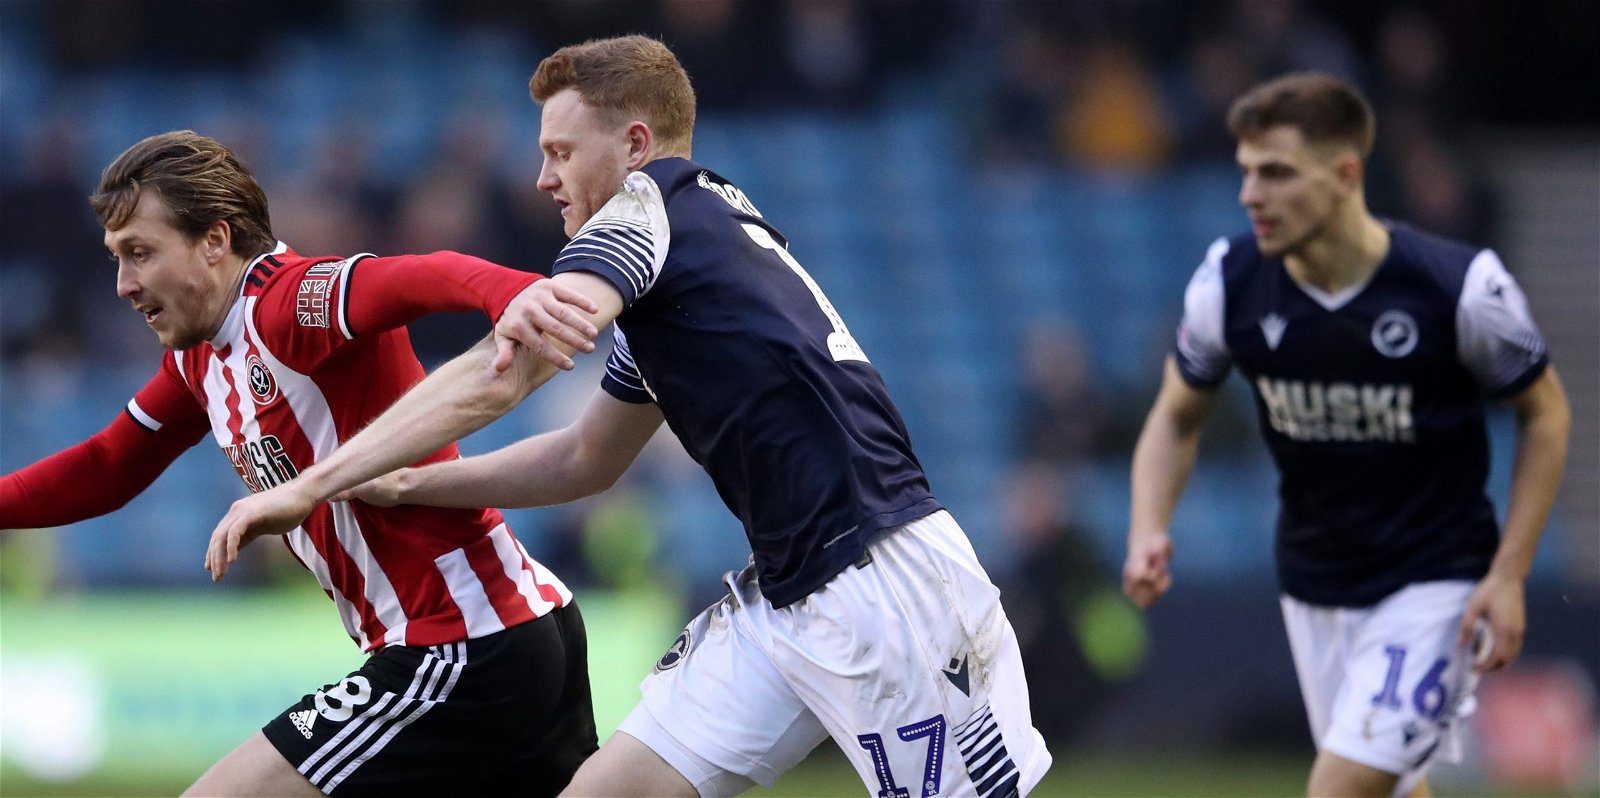 Millwall, St Johnstone sign James Brown after Millwall release